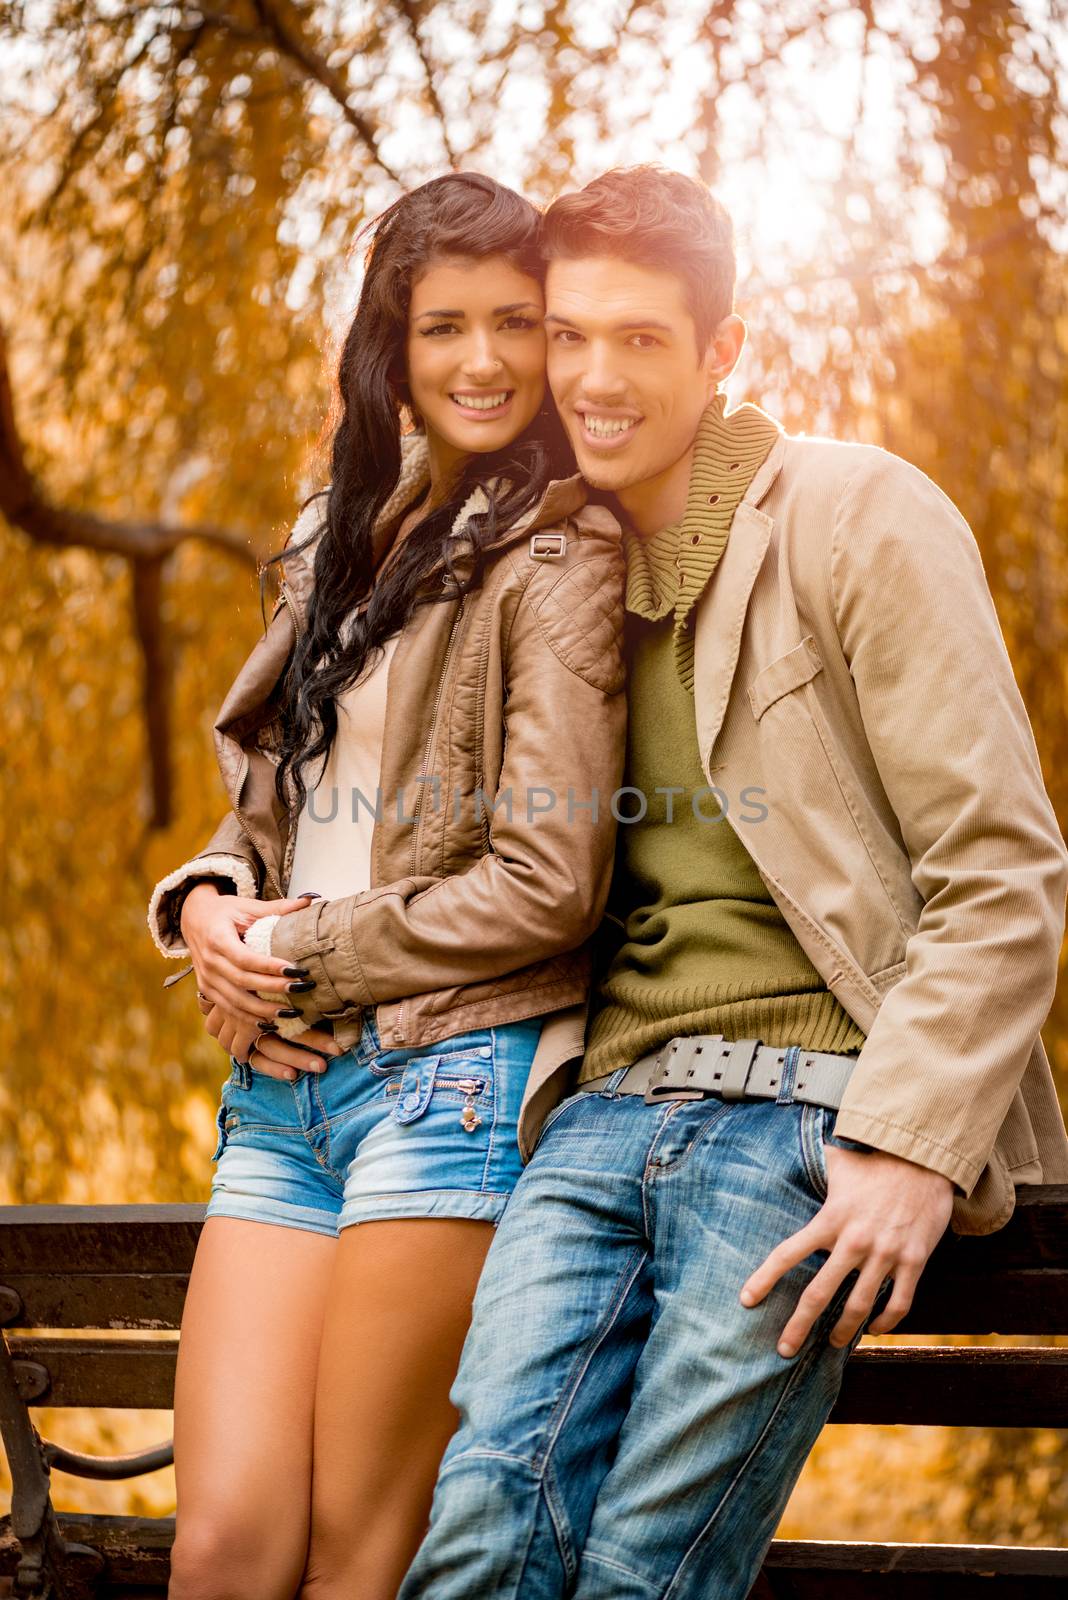 Smiling young couple enjoying autumn day in the park.